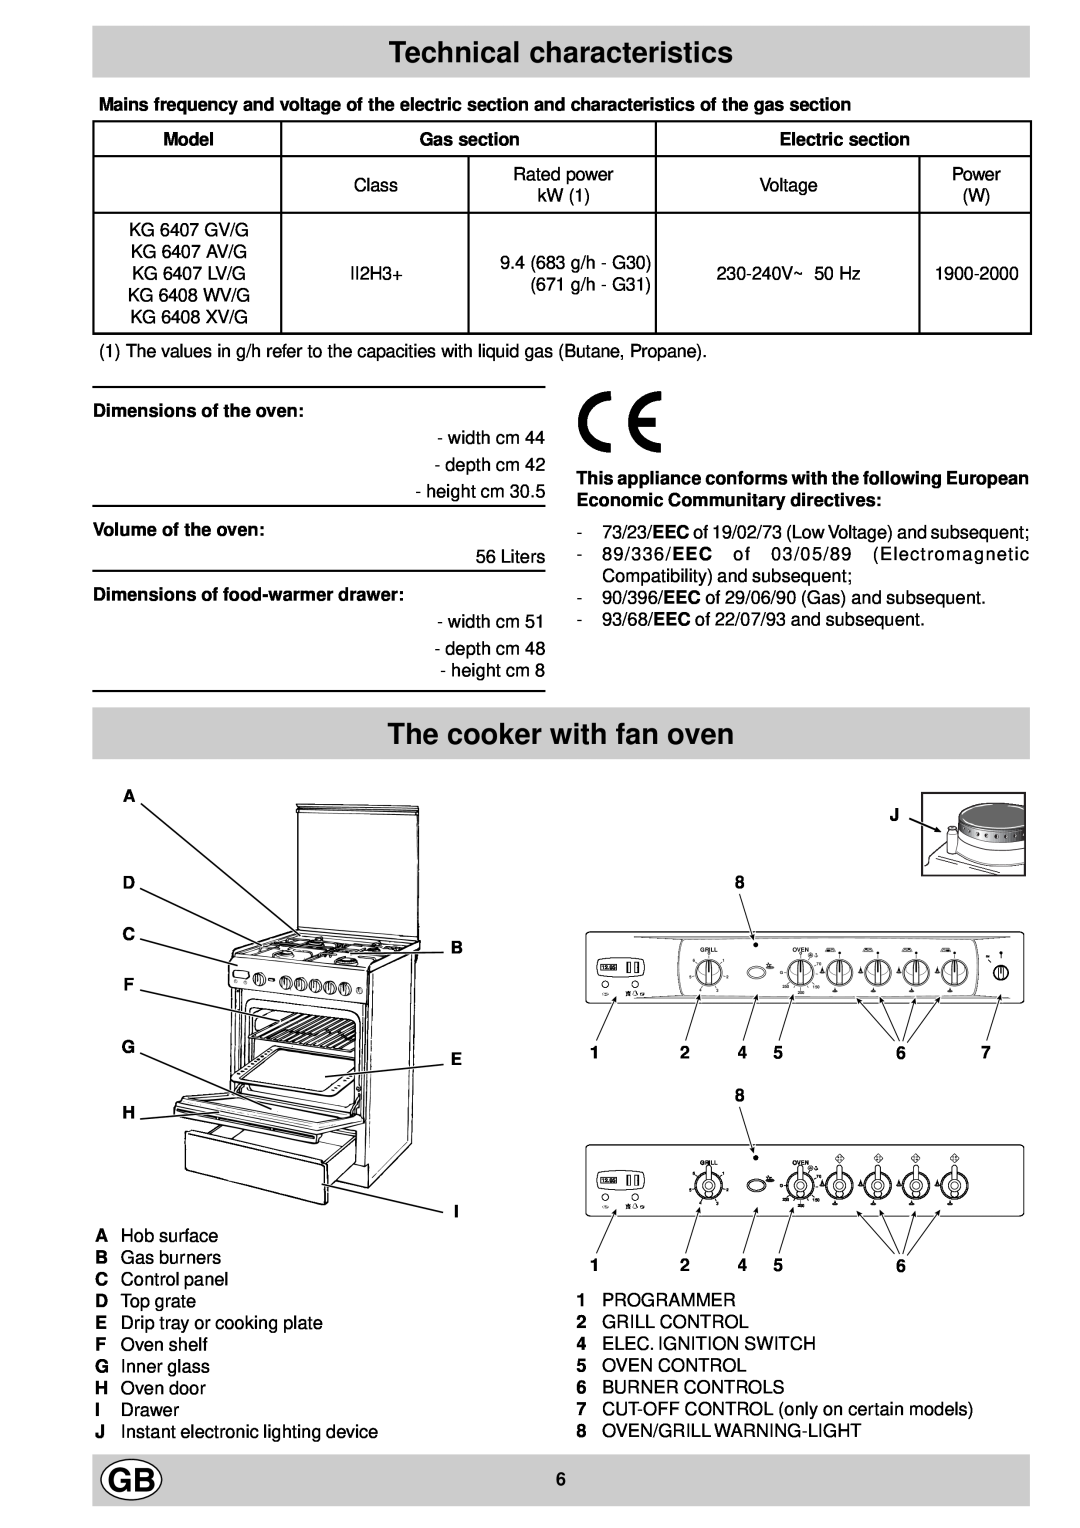 Indesit KG6408 XV/G, KG6407 AV/G, KG6407 LV/G, KG6407 GV/G manual Technical characteristics, The cooker with fan oven 